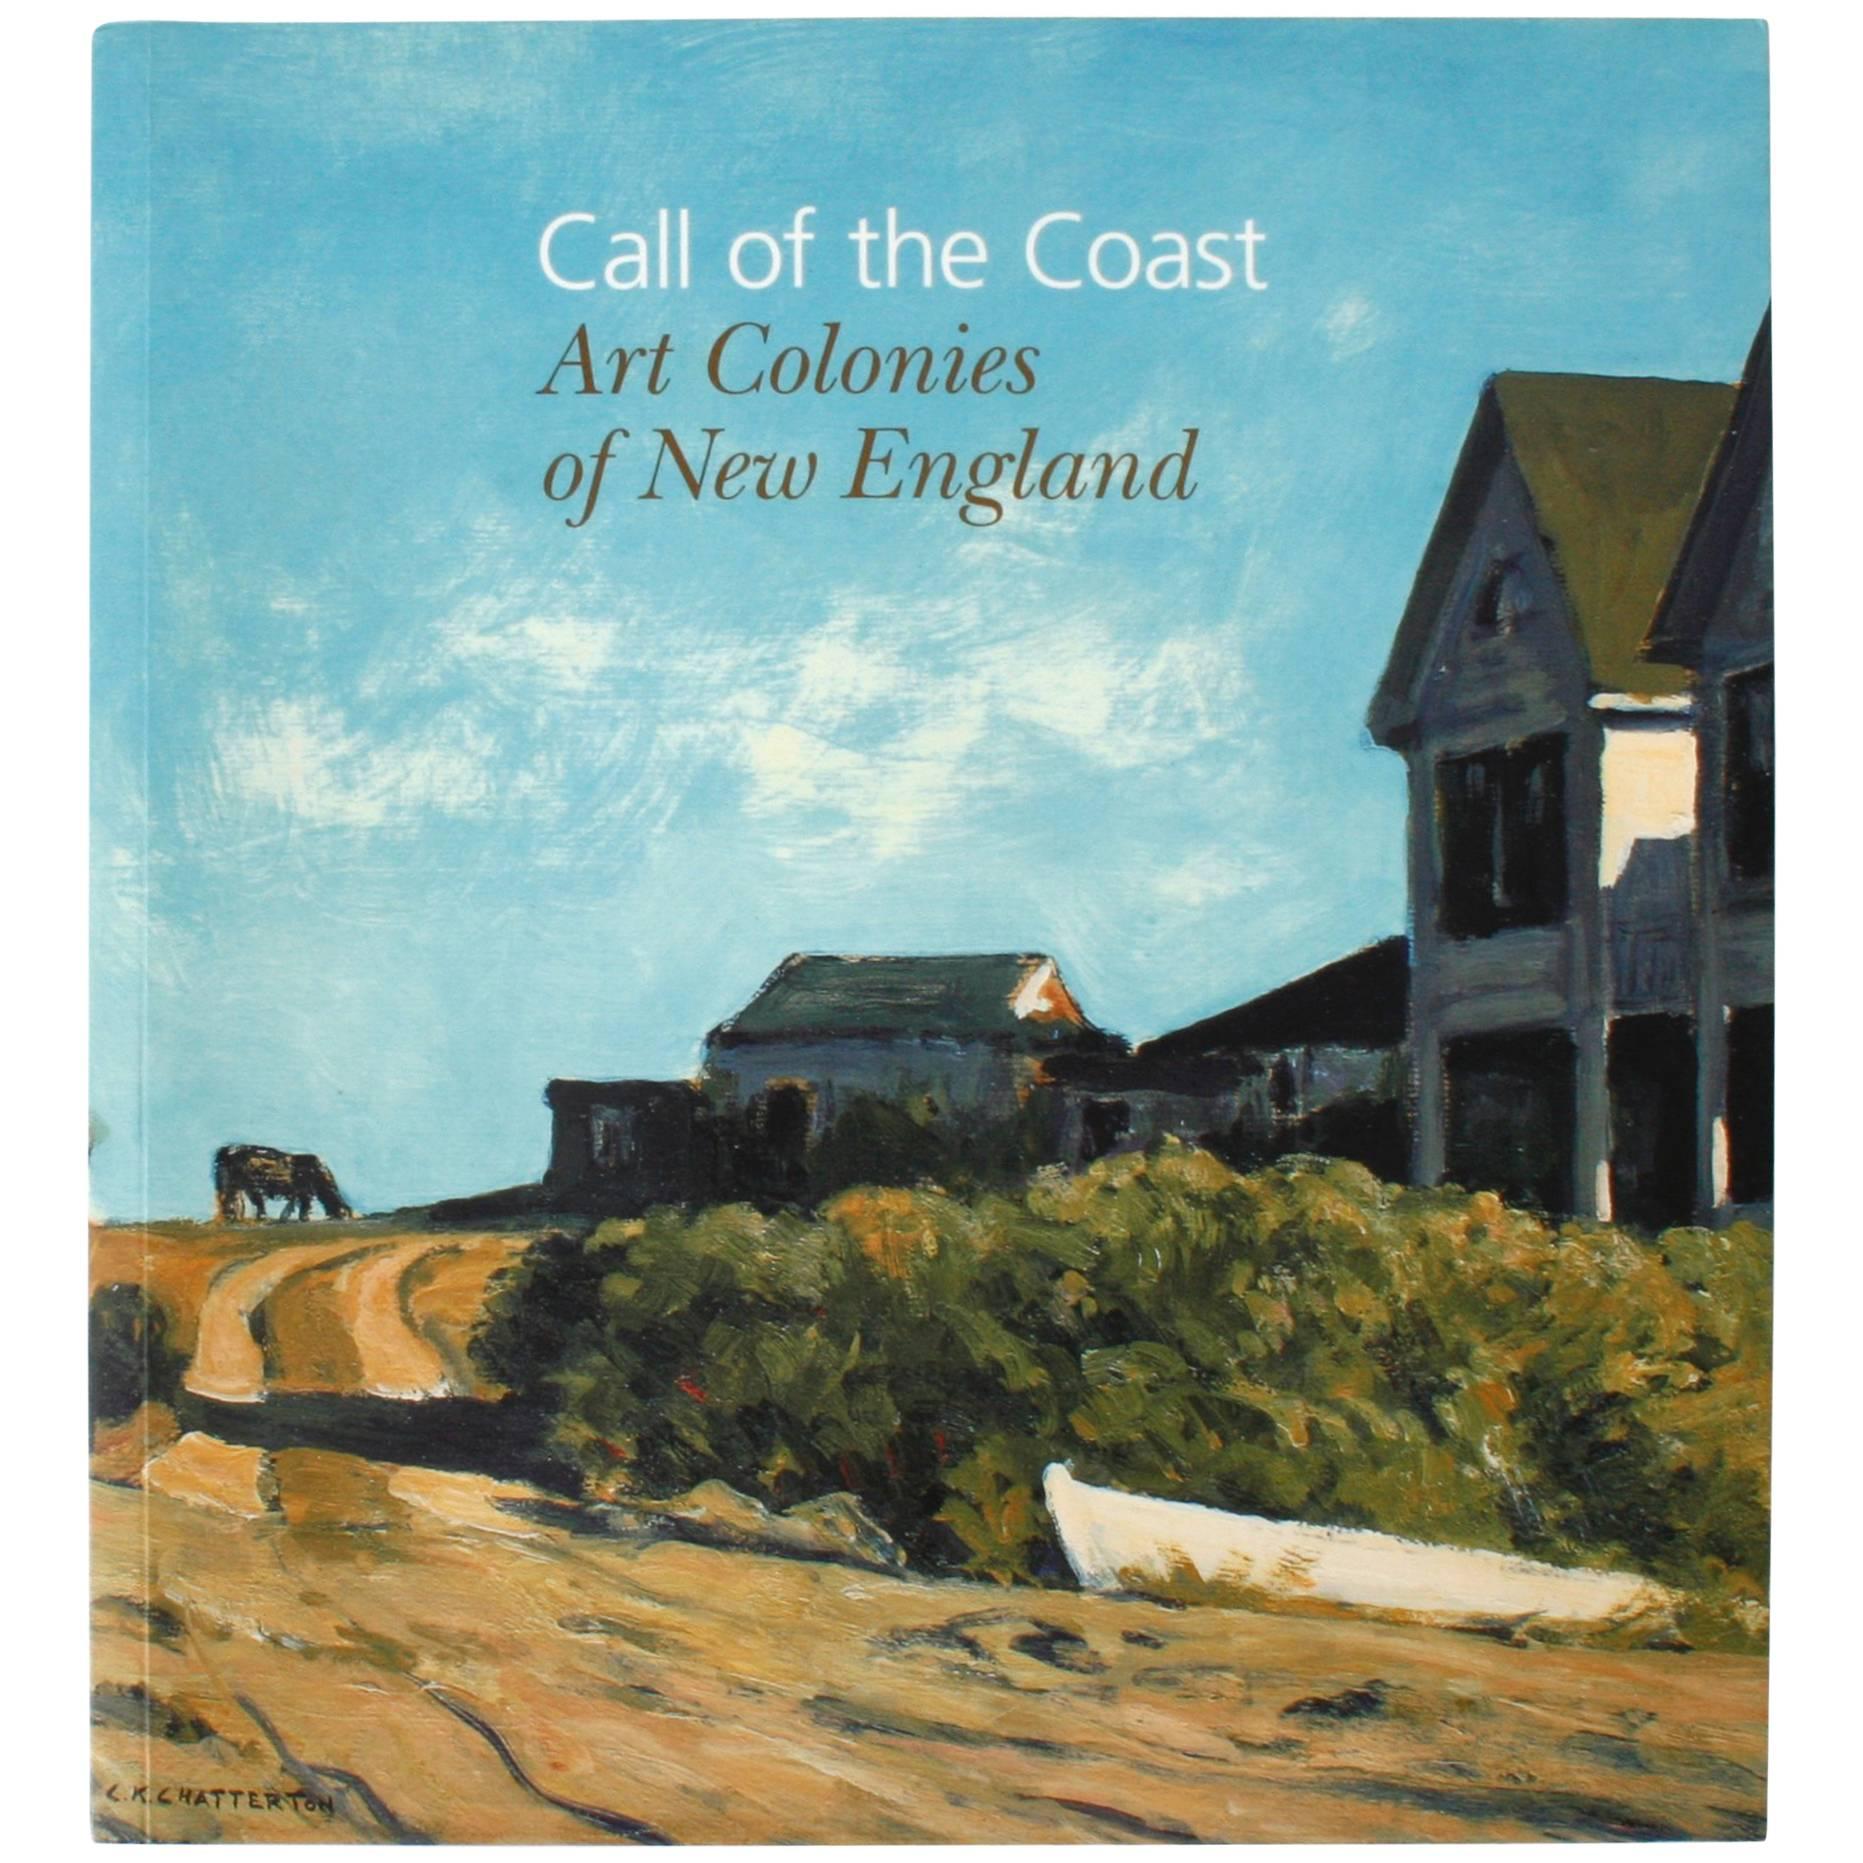 Call of the Coast, Art Colonies of New England, First Edition